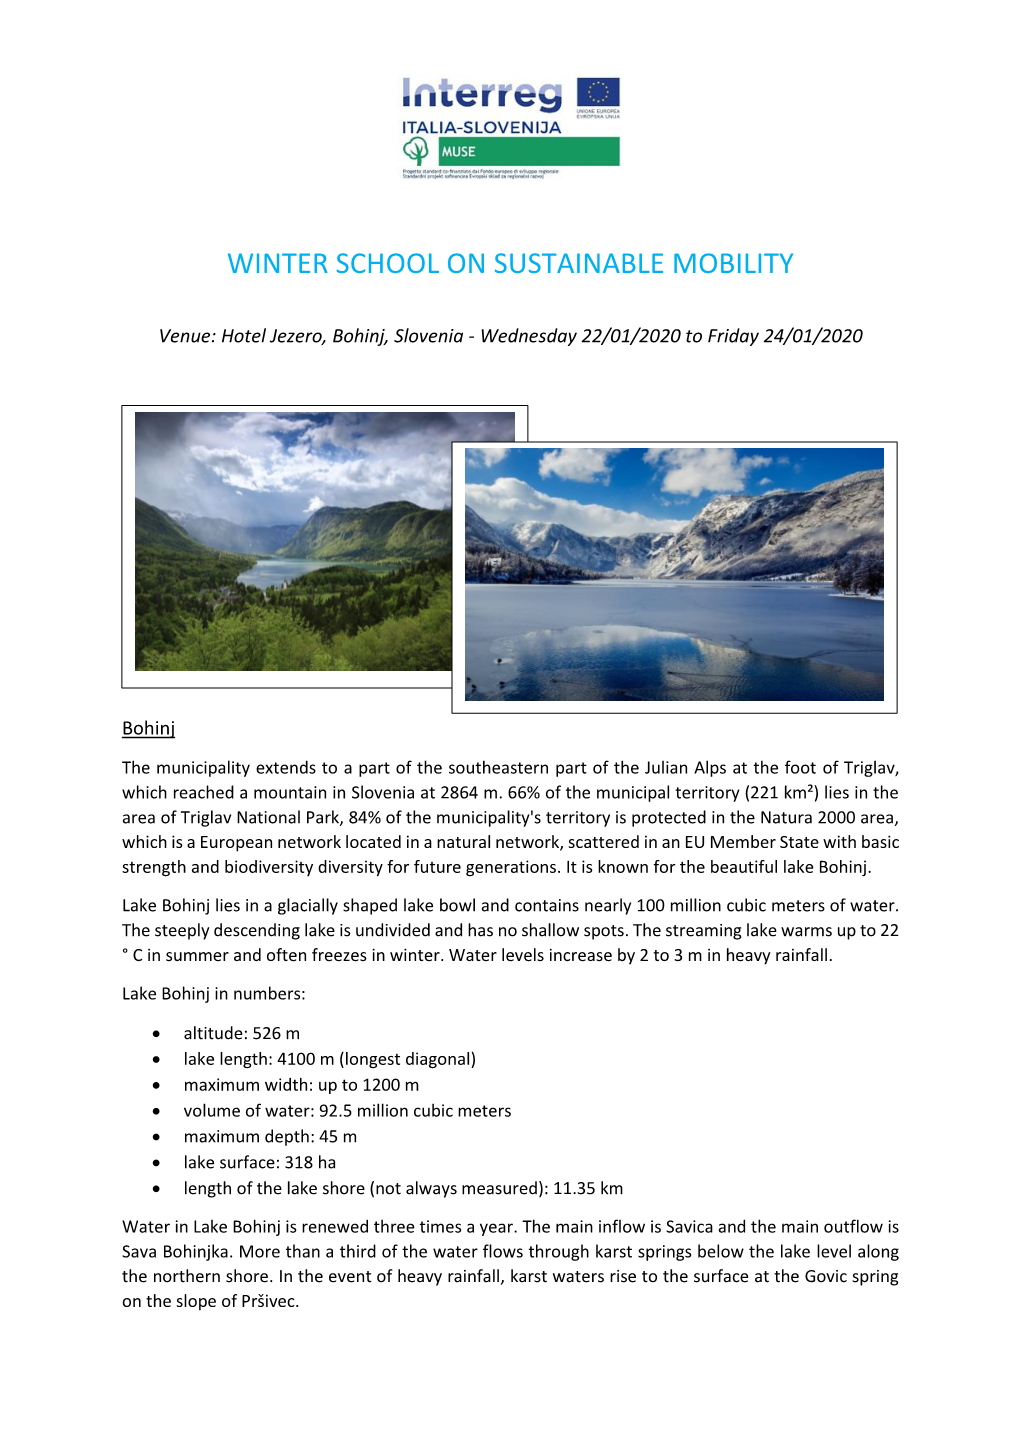 Winter School on Sustainable Mobility